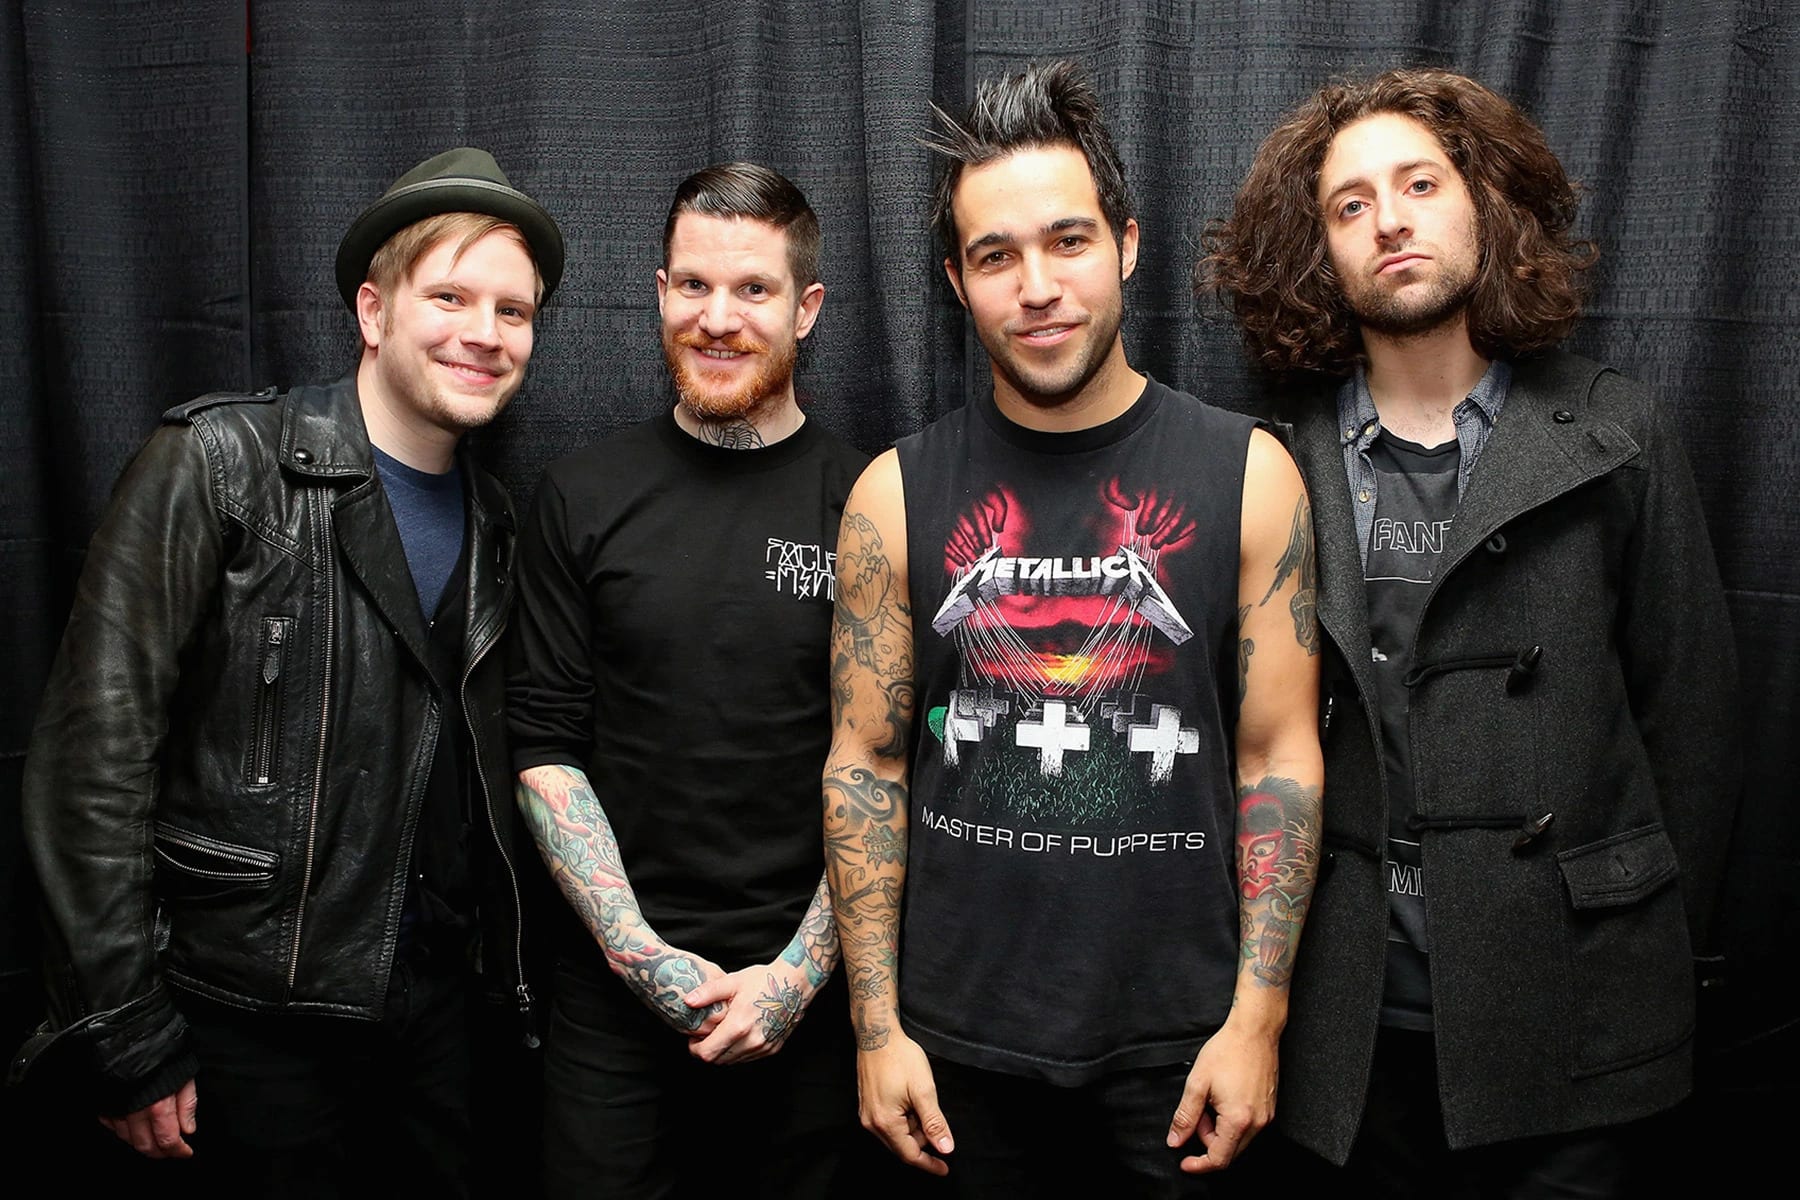 fall out boy uk tour 2023 tickets